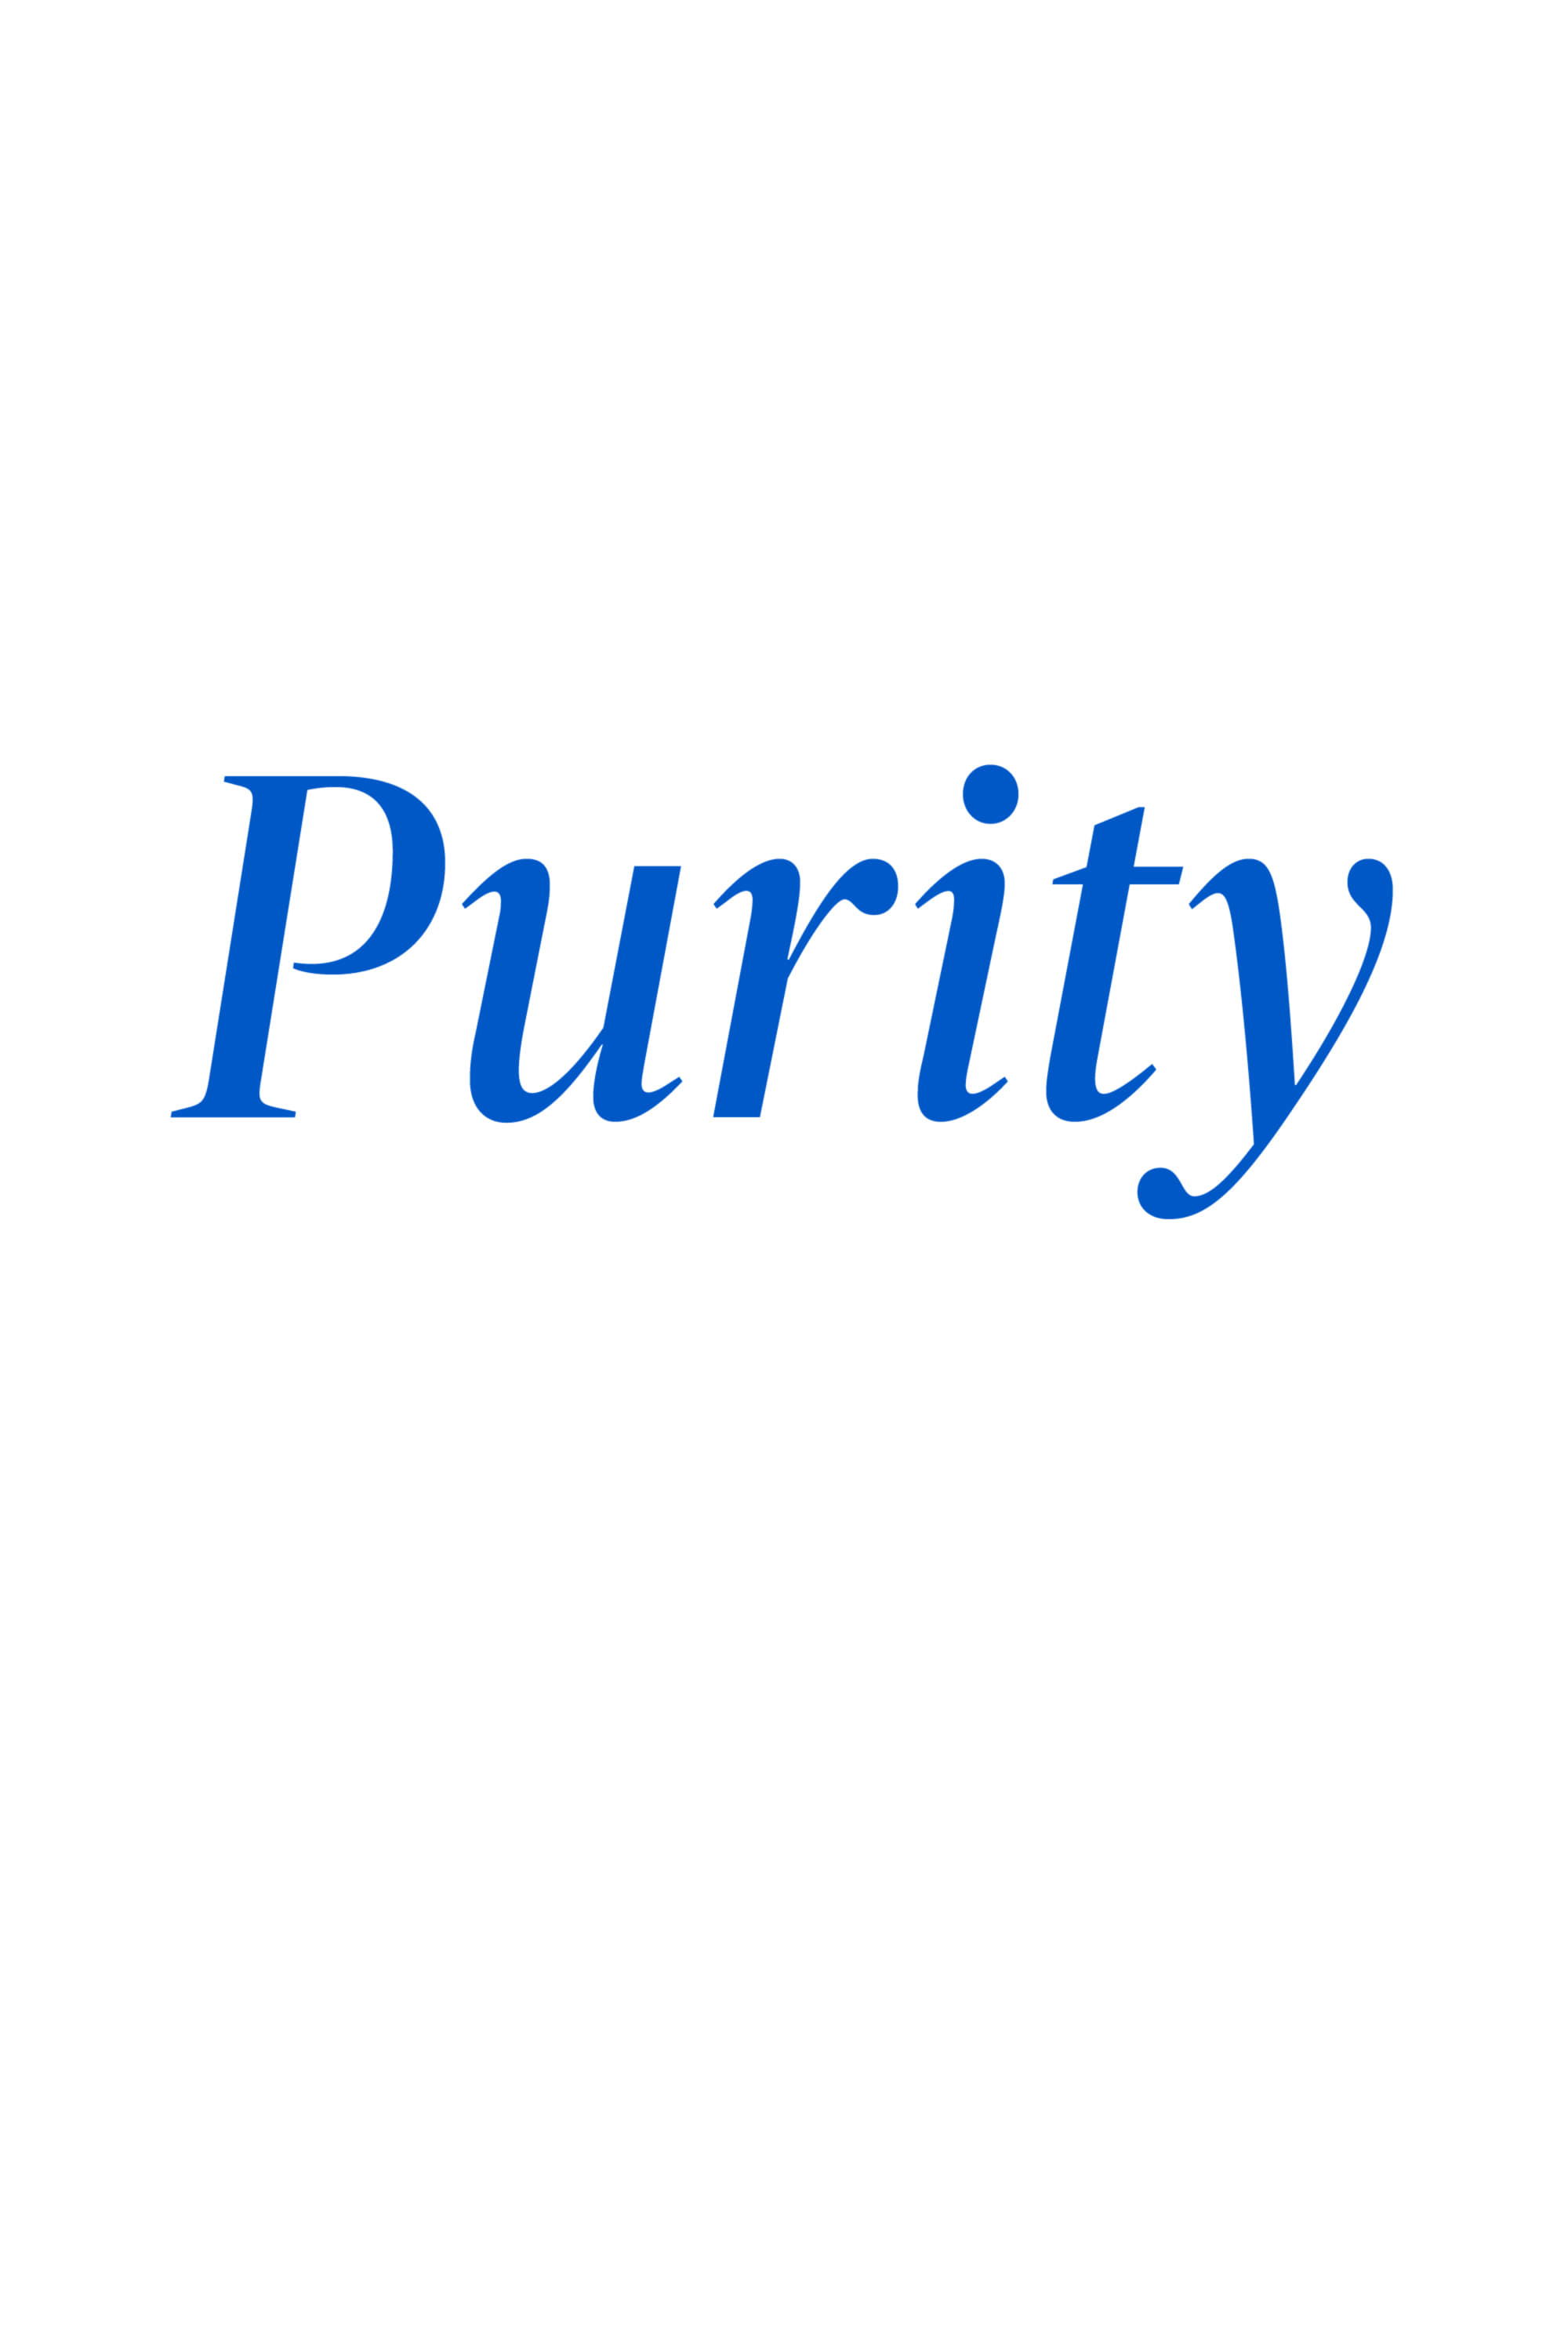 Purity (N/A) | The Poster Database (TPDb)